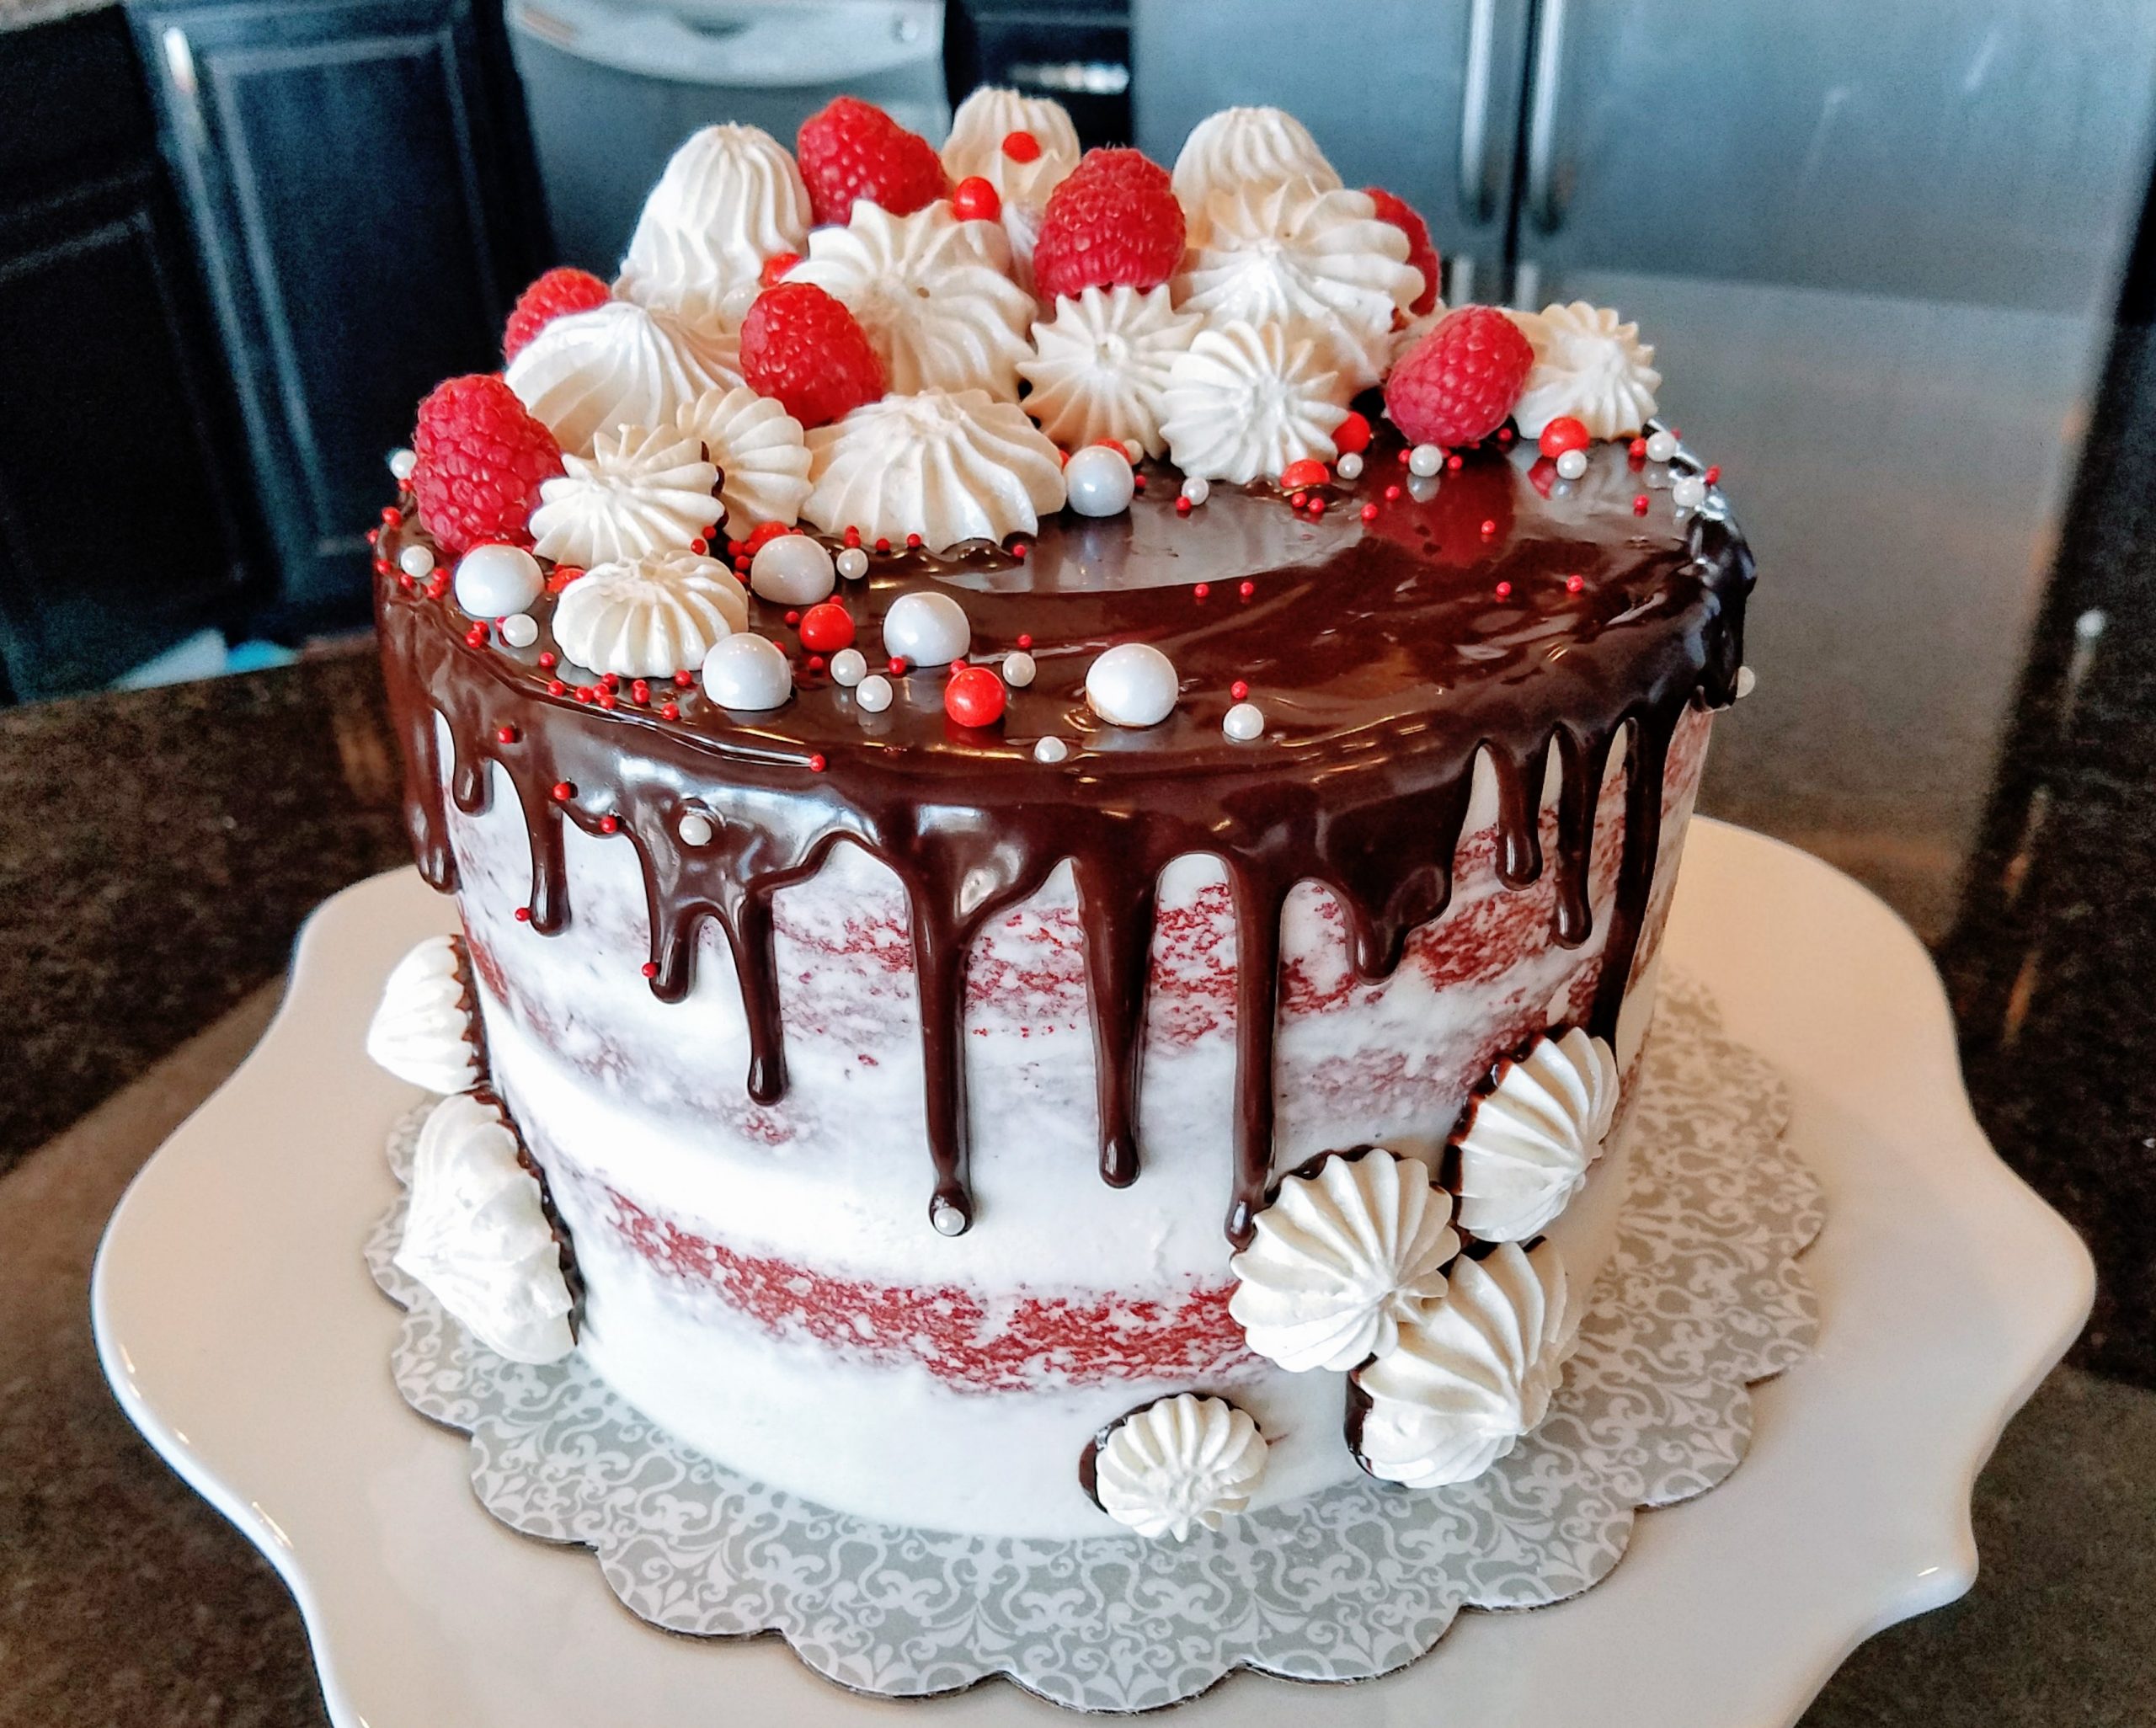 Red Velvet Chocolate Chip Cake with Pecans | Ready Set Eat